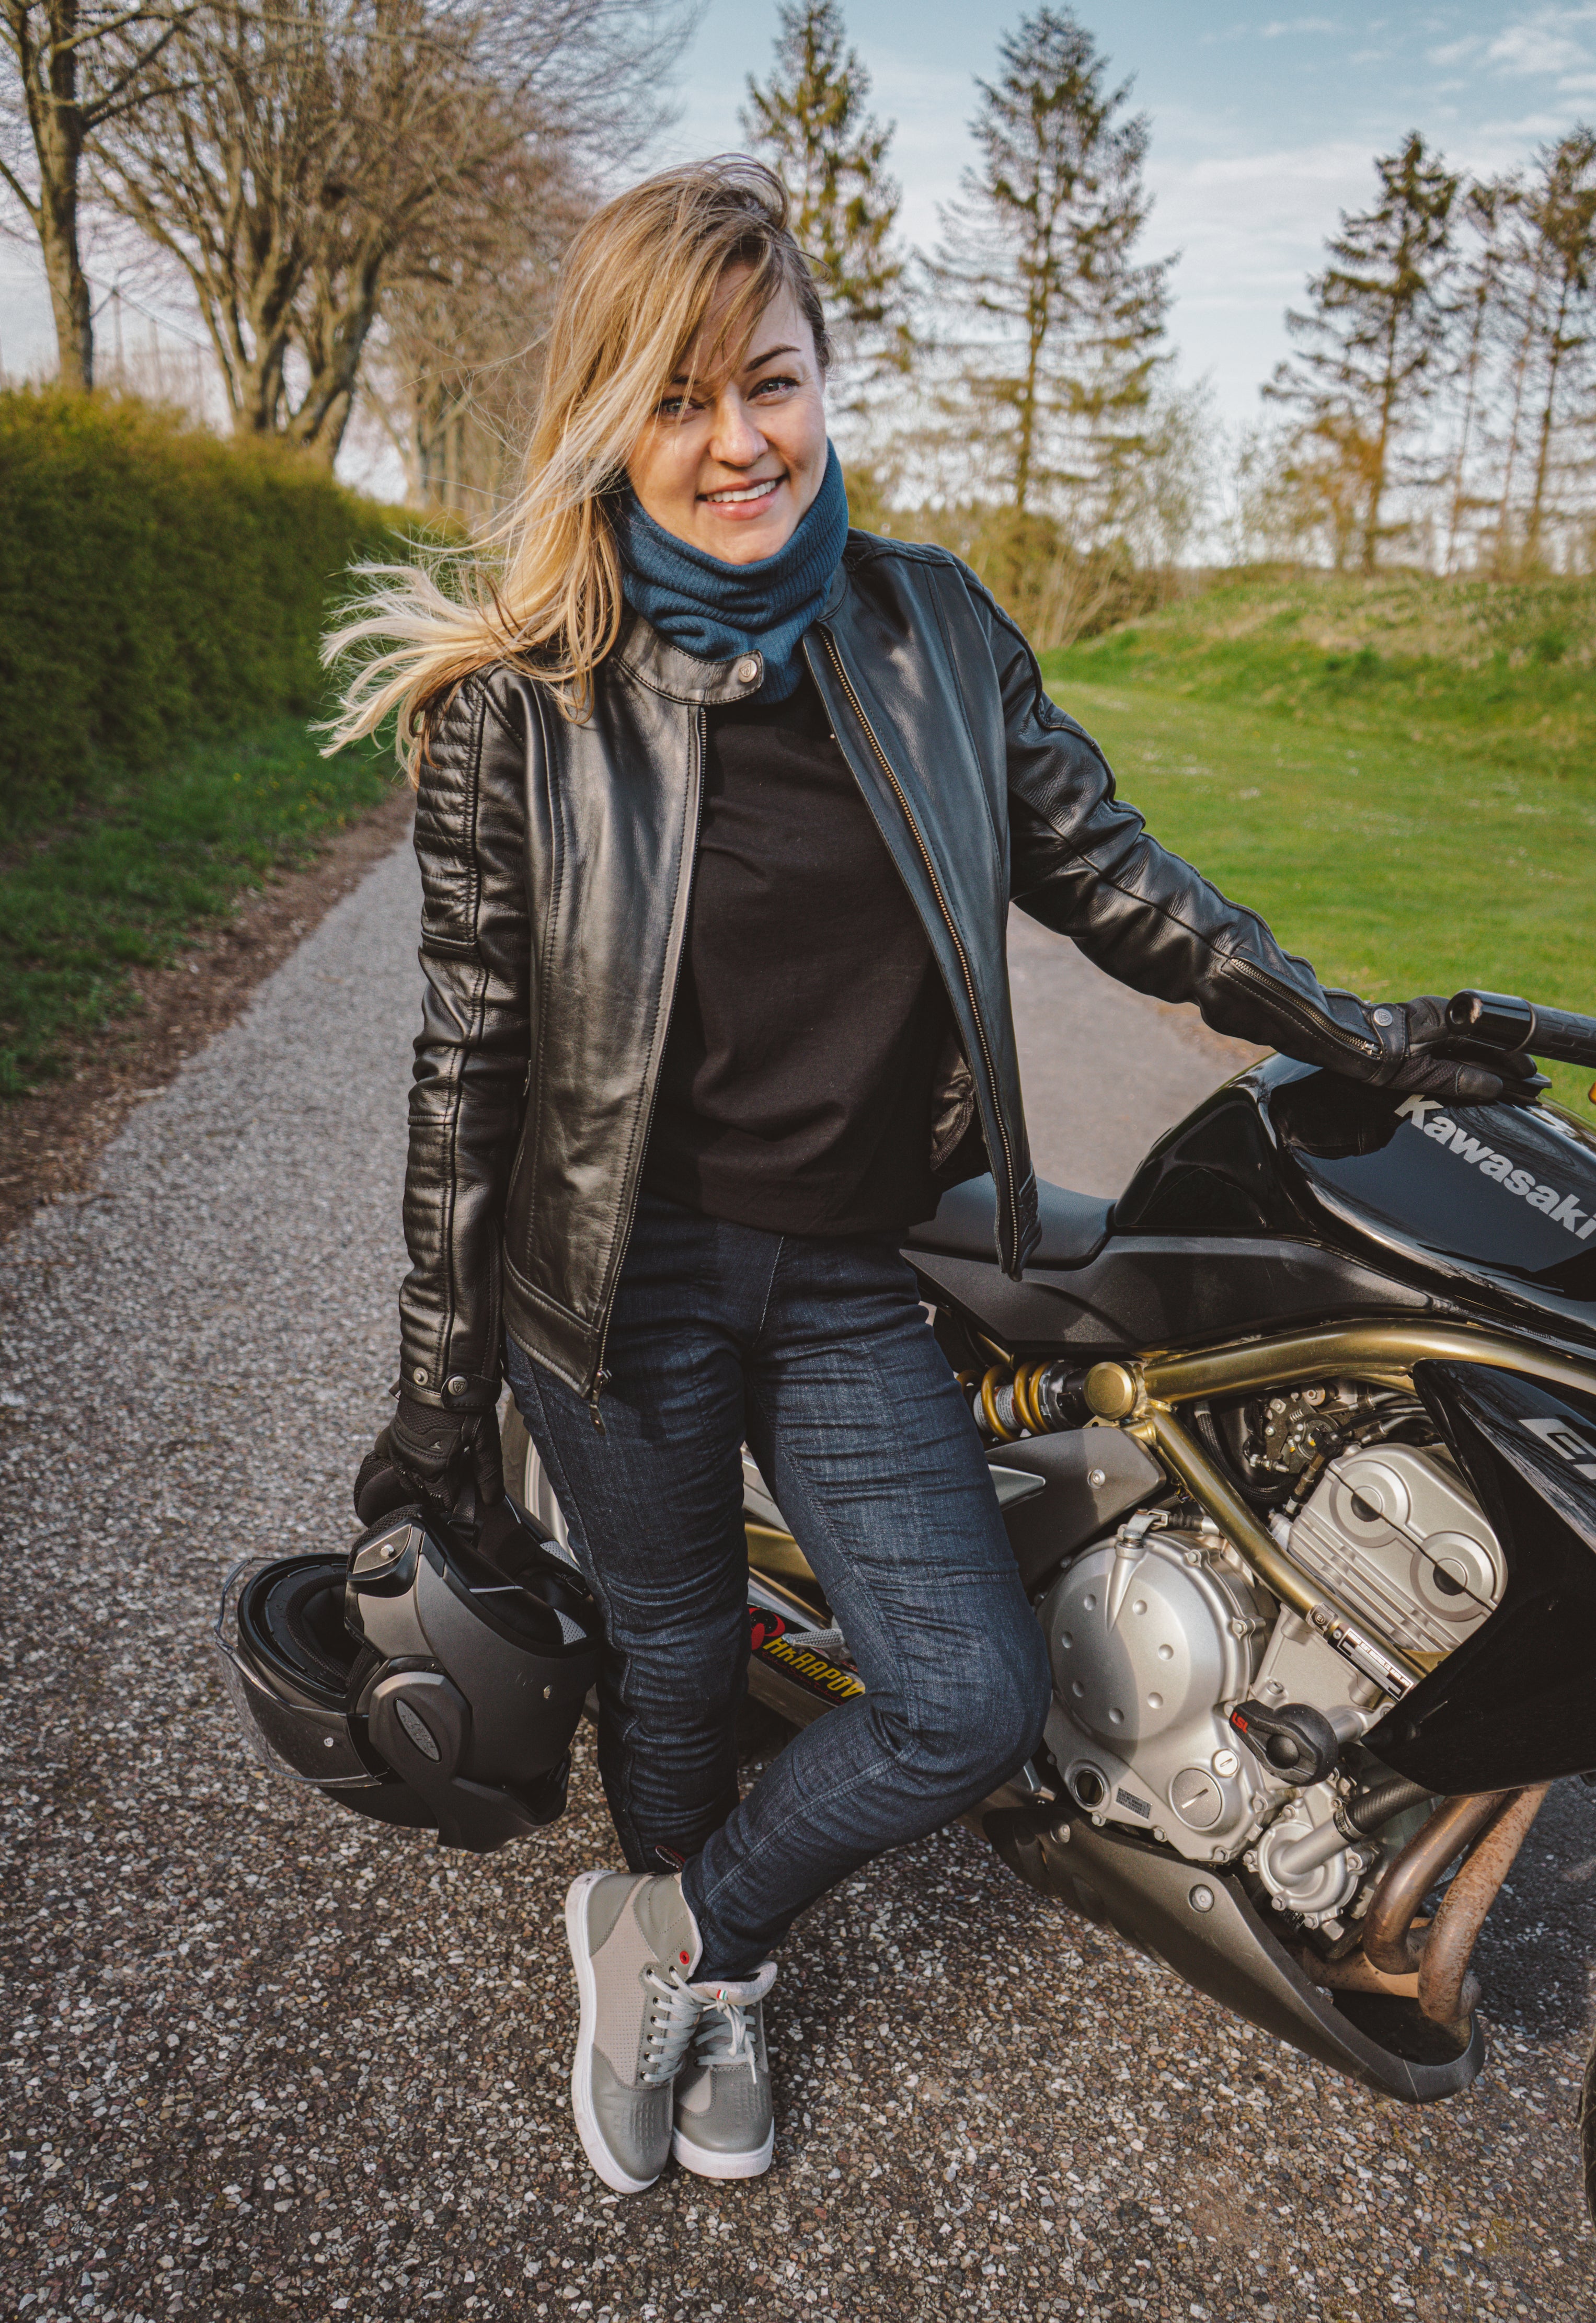 A young woman standing by her Kawasaki motorcycle wearing black leather jacket